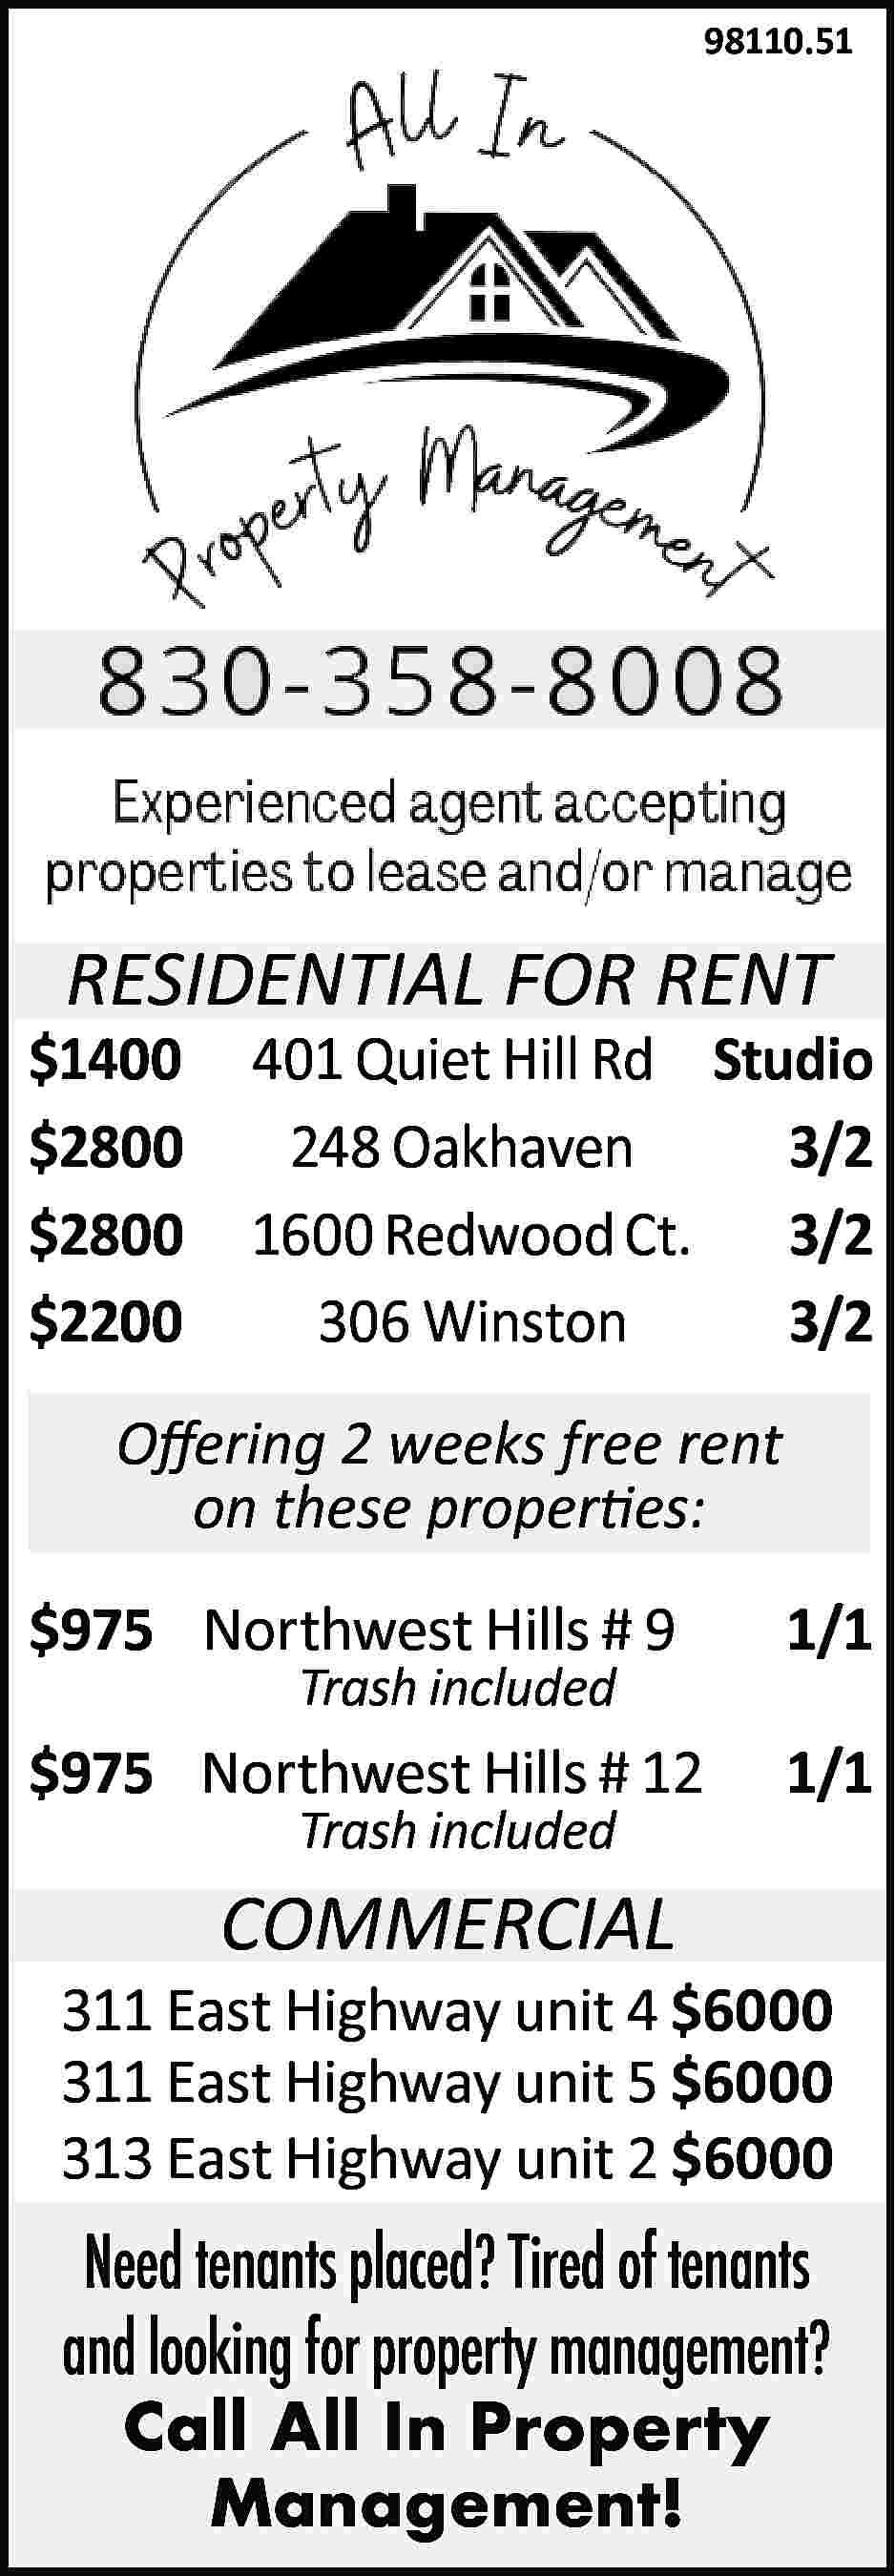 98110.51 RESIDENTIAL FOR RENT $1400  98110.51 RESIDENTIAL FOR RENT $1400 $2800 $2800 $2200 401 Quiet Hill Rd Studio 248 Oakhaven 3/2 1600 Redwood Ct. 3/2 306 Winston 3/2 Offering 2 weeks free rent on these properties: $975 Northwest Hills # 9 1/1 $975 Northwest Hills # 12 1/1 Trash included Trash included COMMERCIAL 311 East Highway unit 4 $6000 311 East Highway unit 5 $6000 313 East Highway unit 2 $6000 Need tenants placed? Tired of tenants and looking for property management? Call All In Property Management!